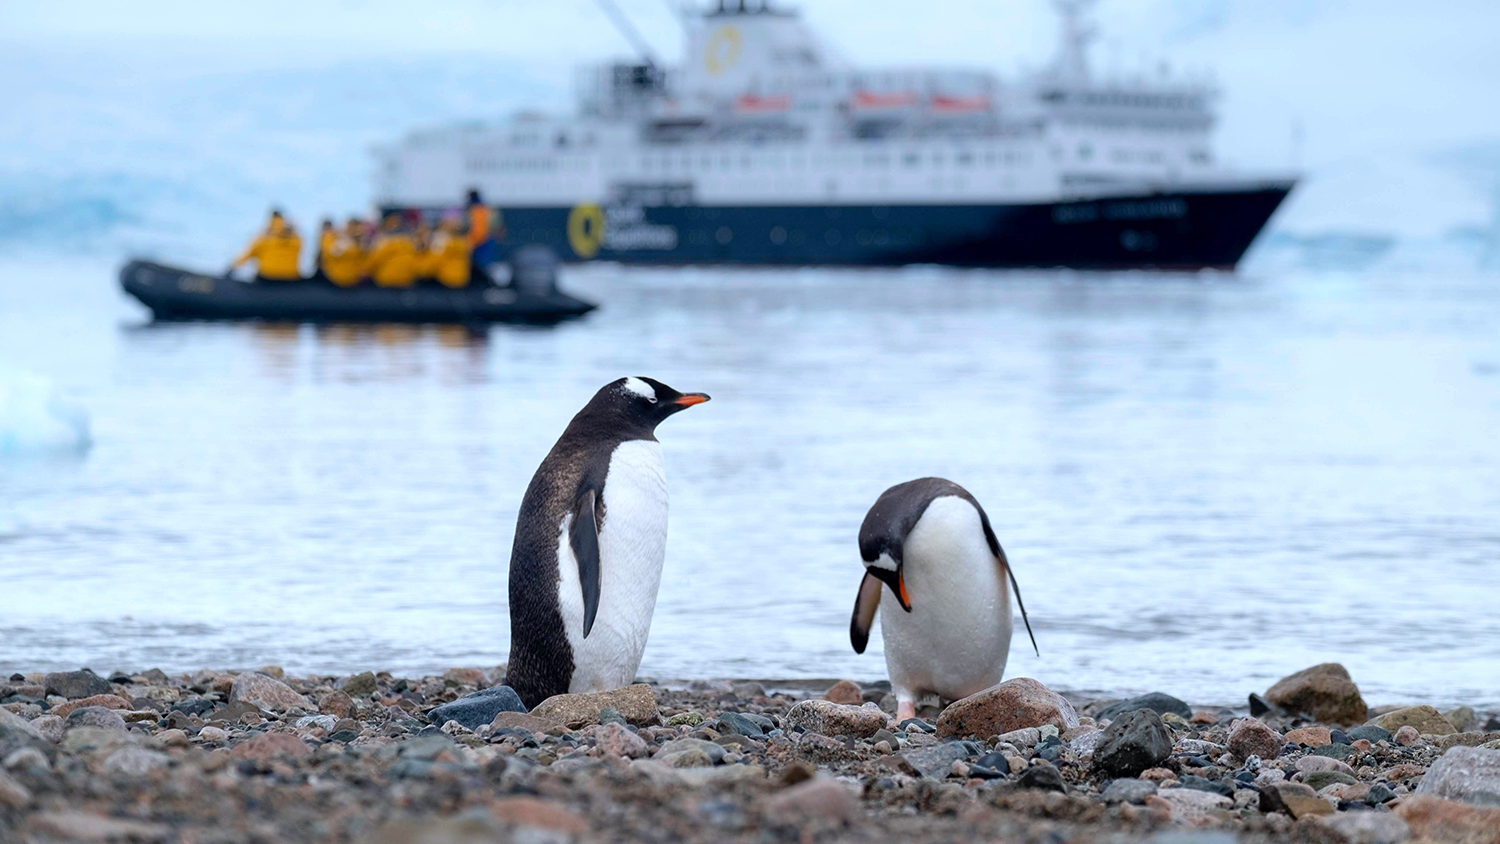 Gentoo penguins on a stony beach on Danco Island in the Antarctic Peninsula with a Quark Expeditions ship in the background.